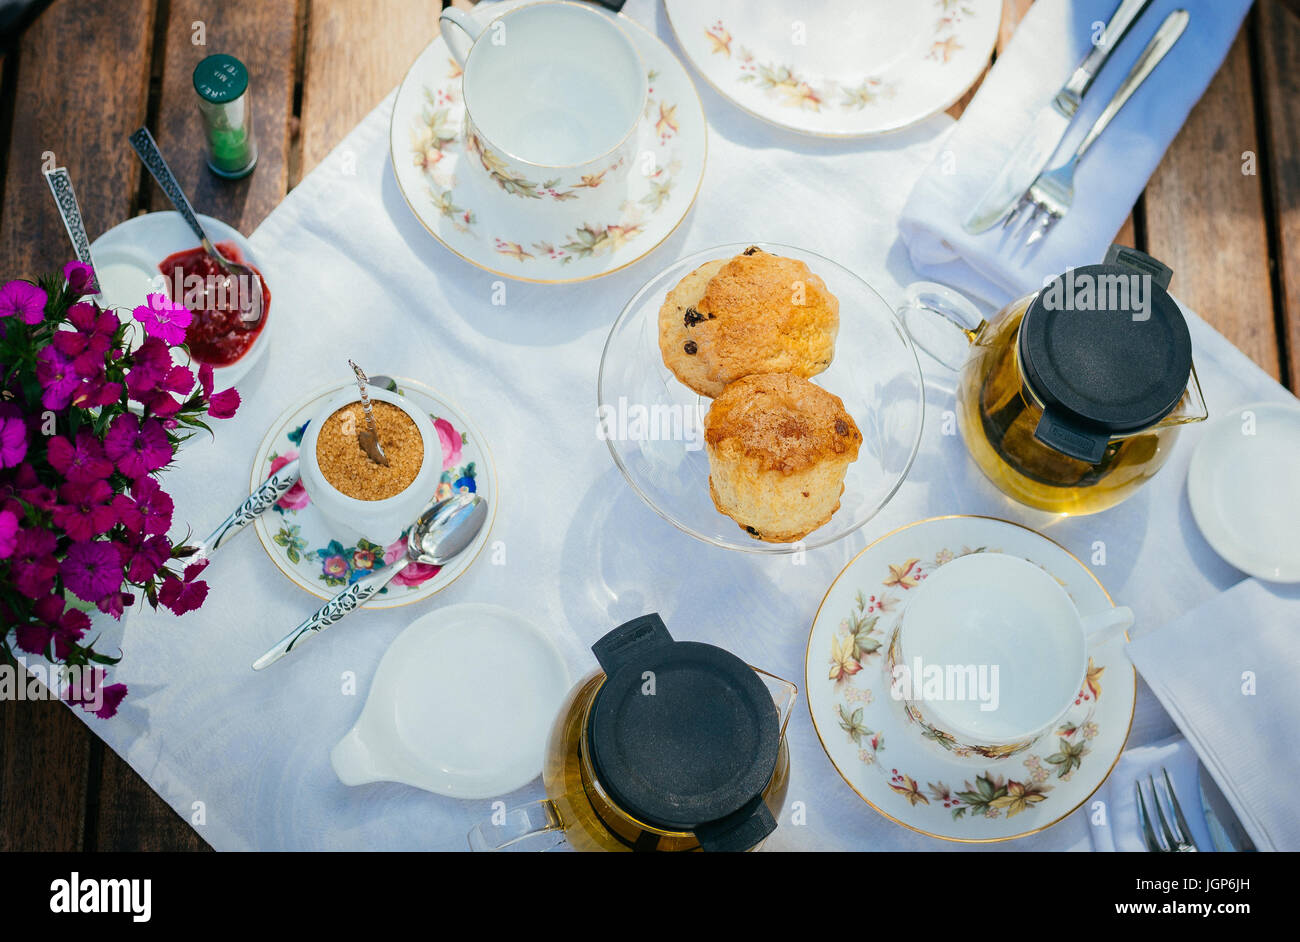 Plates, cups, scones, and tea for afternoon tea Stock Photo